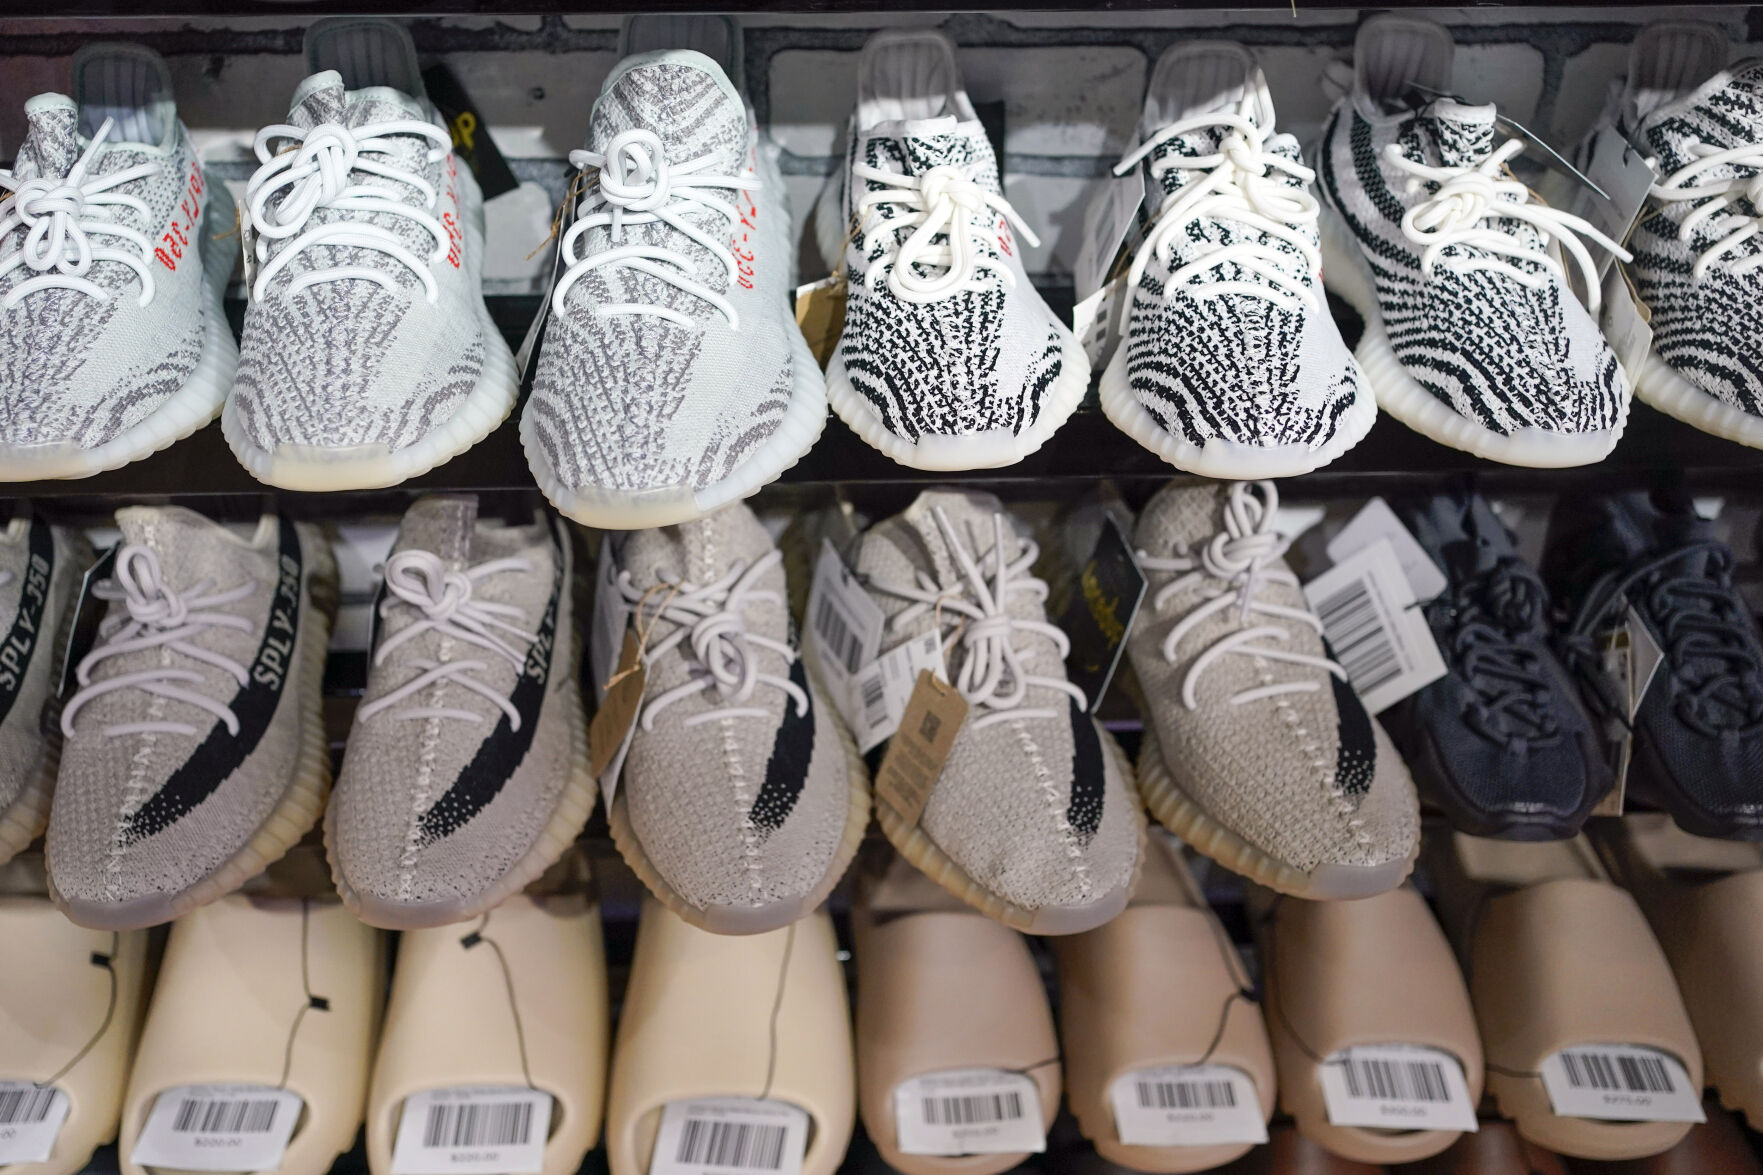 <p>FILE - Yeezy shoes made by Adidas are displayed at Laced Up, a sneaker resale store, in Paramus, N.J., on Oct. 25, 2022. Adidas is releasing a second batch of high-end Yeezy sneakers after cutting ties with rapper Ye, formerly known as Kanye West, as the shoemaker seeks to unload the unsold shoes while donating to groups fighting antisemitism. The online sale, to start Wednesday Aug. 2, 2023 through the Confirmed app, Adidas app and adidas.com, follows an earlier batch of sales in May. (AP Photo/Seth Wenig, File)</p>   PHOTO CREDIT: Seth Wenig 